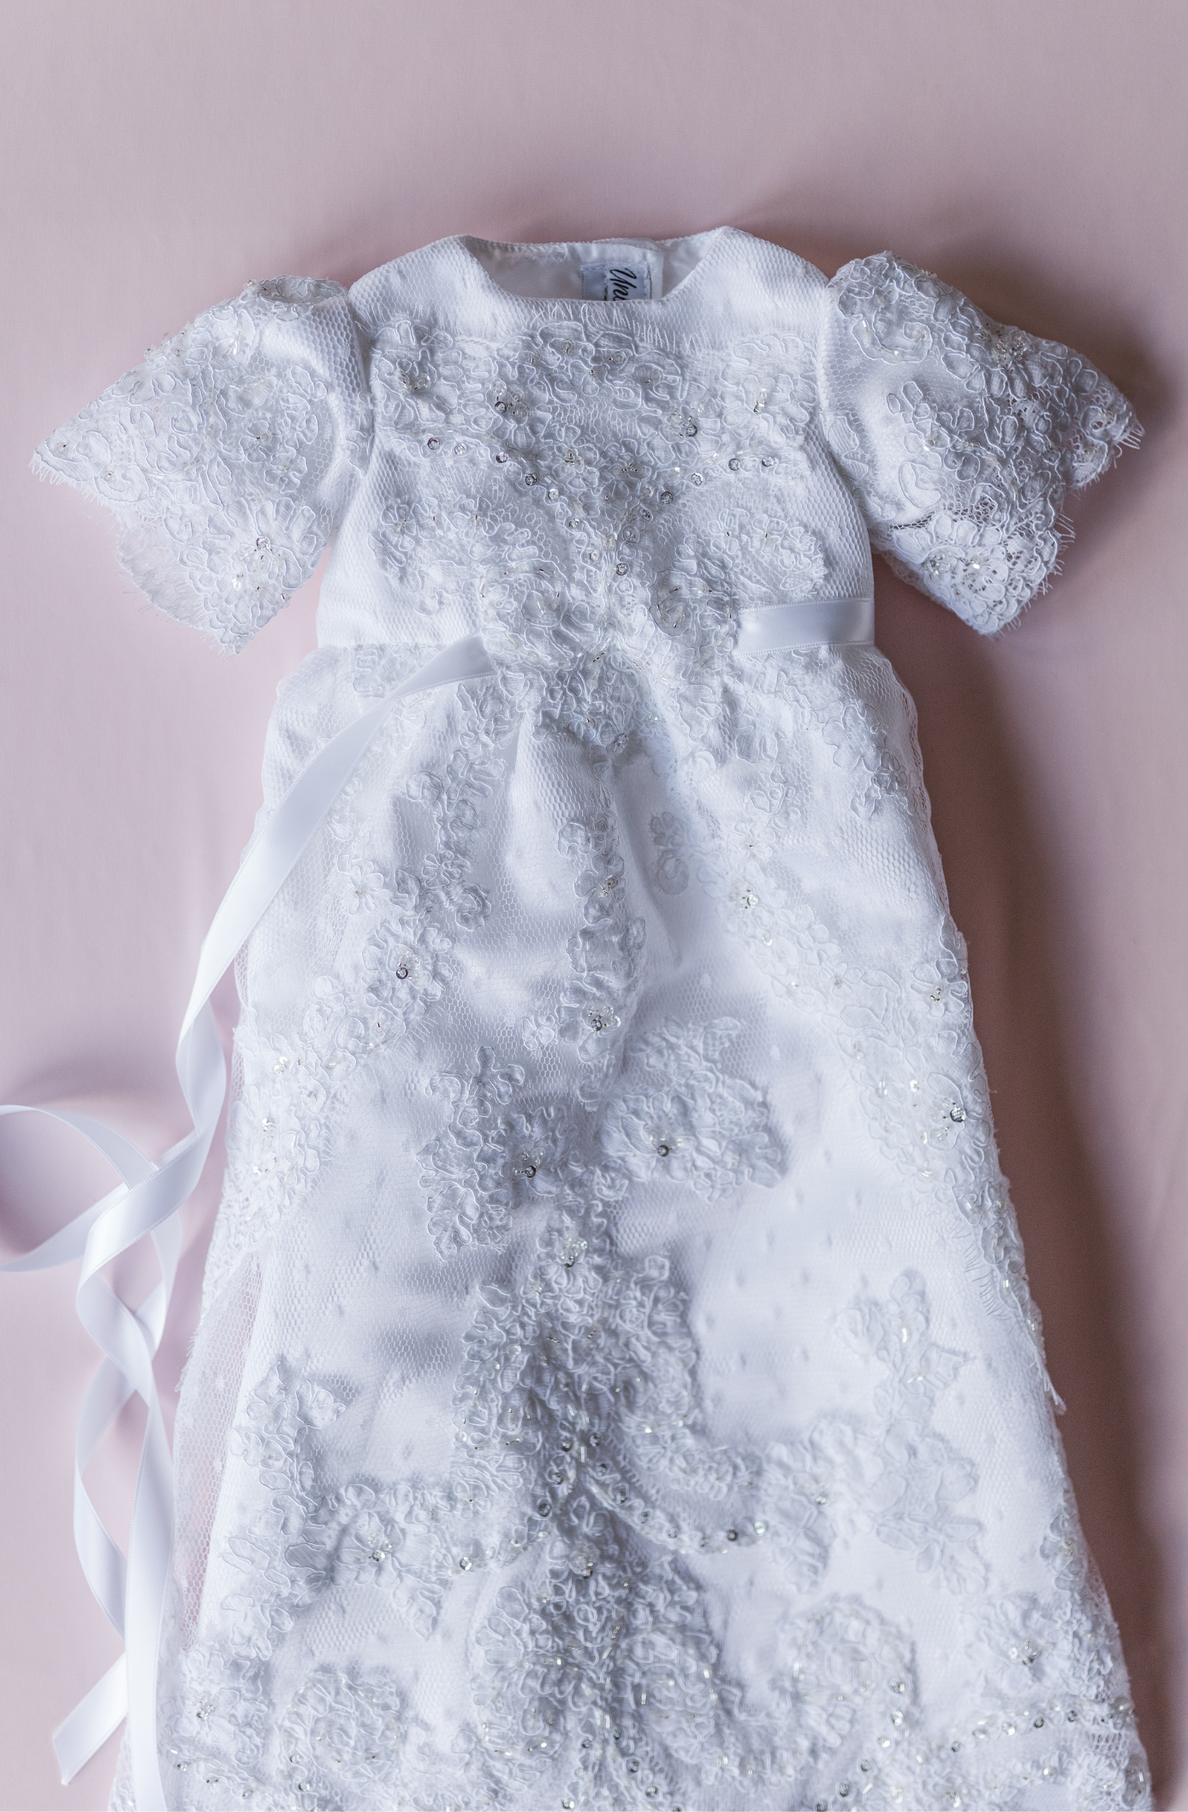 Luxury Lace Pearls Christening Gown For Baby Girls White/Ivory Long Lace  Baptism Gown With Bonnet From Nanna11, $83.96 | DHgate.Com